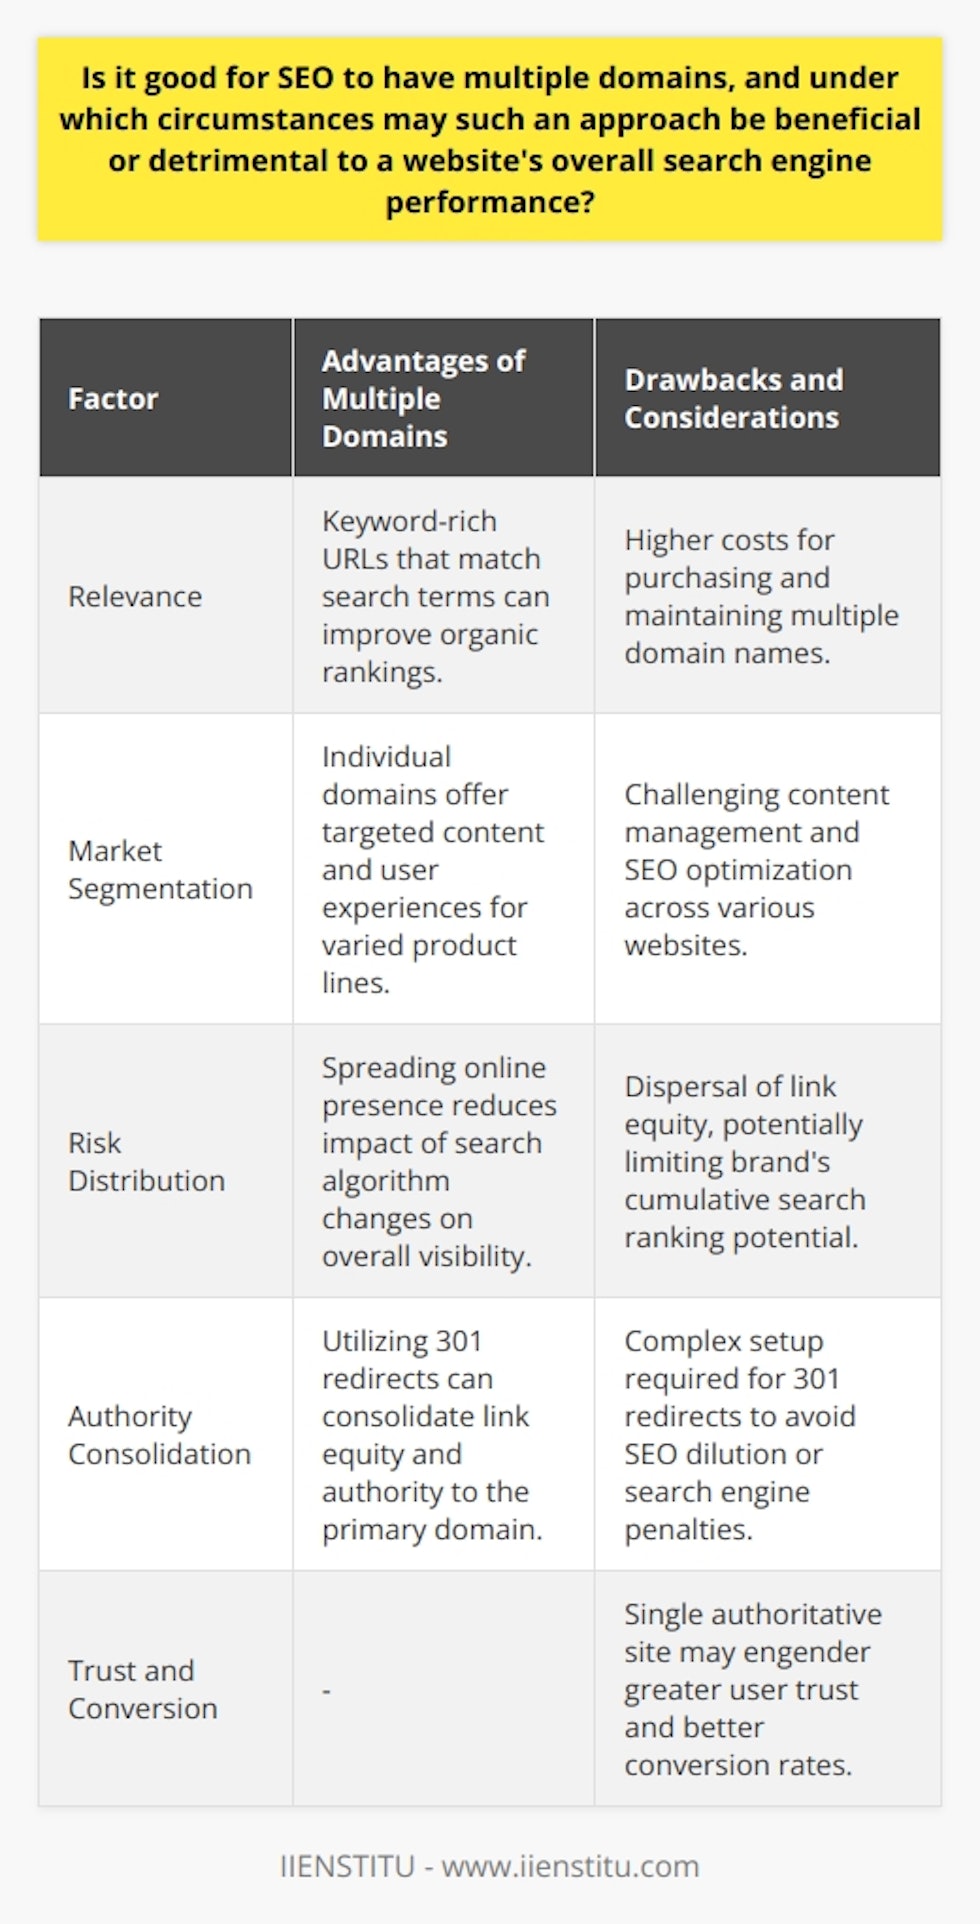 Having multiple domains can be a strategic choice in SEO, with the potential to improve performance under certain conditions. Businesses need to consider the advantages and potential drawbacks of adopting such a strategy.**Advantages of Multiple Domains for SEO**One key advantage of multiple domains is the ability to possess keyword-rich URLs. Search engines like Google often reward relevance, and if a domain name directly matches key search terms, this could lead to a boost in organic search rankings. This aspect is particularly beneficial for niche websites that target specific keywords.Furthermore, owning multiple domains allows businesses to compartmentalize their online offerings. For instance, a company with varied product lines could cater to those individual markets more effectively by providing targeted content and user experiences on separate domains. Each domain could potentially rank for its specific product or service, increasing the overall online visibility of the business.Another advantage is risk distribution. Search engines periodically update their algorithms, which can unpredictably affect website rankings. By spreading the business's online presence across multiple domains, a company can mitigate the risk of losing its entire online visibility due to a single update negatively impacting one website.**Potential Drawbacks**However, having multiple domains comes with its set of challenges. The costs associated with purchasing and maintaining several domain names can add up, particularly for small to medium-sized businesses with limited budgets. Additionally, the task of managing content, SEO optimization, and user experience across multiple websites can be an overwhelming undertaking.Another potential issue is the dispersal of link equity. If multiple domains are not managed correctly, any backlinks to the individual websites may not contribute collectively to building the authority of a single domain, which could limit the search ranking potential of the primary brand.**Focused Approach versus Multiple Domains**For some businesses, having a single, authoritative website trumps the multiple domain strategy. A concentrated SEO effort on one domain that publishes high-quality content regularly is more likely to attract organic high-quality backlinks and, consequently, higher search rankings. An authoritative site also tends to instill more trust among users, which is an important factor both for SEO and conversion rates.**The Redirect Strategy**When correctly employed, the redirect strategy — using 301 redirects to forward traffic from multiple domains to a single primary domain — can enhance SEO efforts. This technique works best when the additional domains have a history and some built-in authority. Through 301 redirects, link equity from the additional domains passes on to the main site, which may strengthen its authority and ranking.However, to avoid SEO dilution or penalties, it's essential to ensure that the redirects are correctly set up. The redirects must seamlessly guide users and search engine crawlers to the appropriate pages on the primary domain without causing confusion or leading to dead links.**Conclusion**Deciding whether to operate multiple domains for SEO is contingent on the unique goals, resources, and structure of a business. The approach should integrate an evaluation of potential SEO benefits against the associated costs and complexities. If the benefits align with business objectives and can be effectively managed without overstretching resources, multiple domains might prove to be a valuable SEO asset.